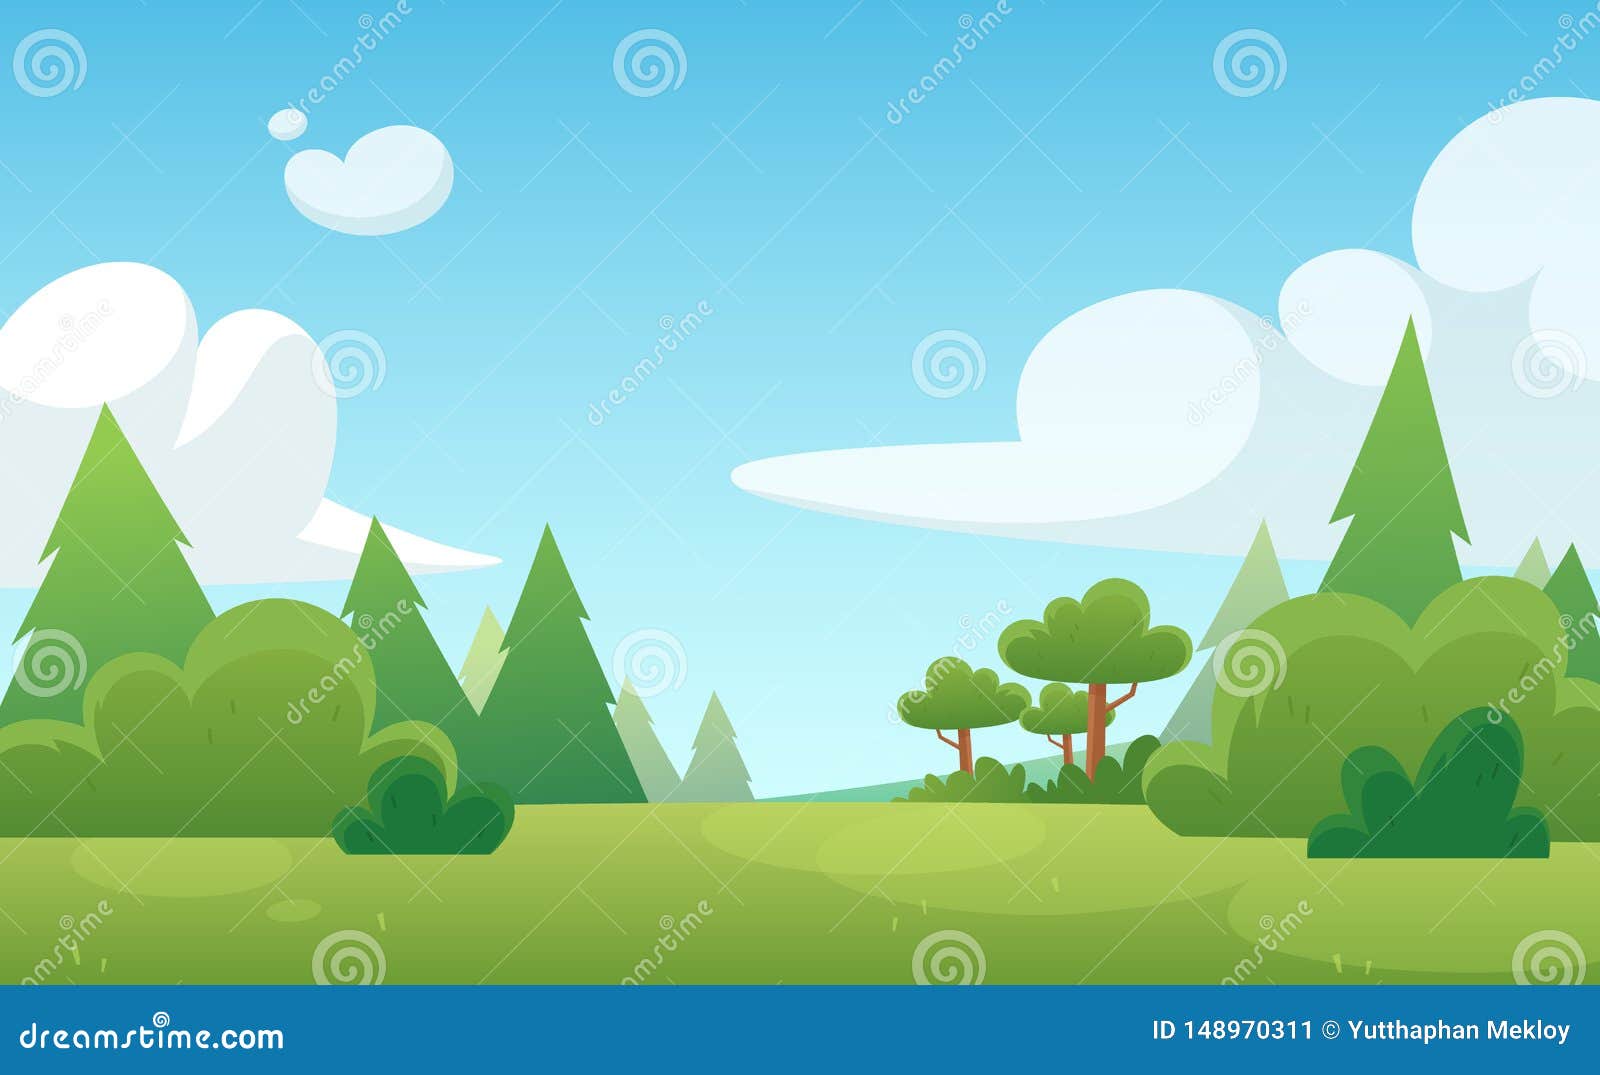 Cartoon Background for Game and Animation. Green Forest with Blue Sky and  Clouds. Landscape Stock Vector - Illustration of scene, summer: 148970311